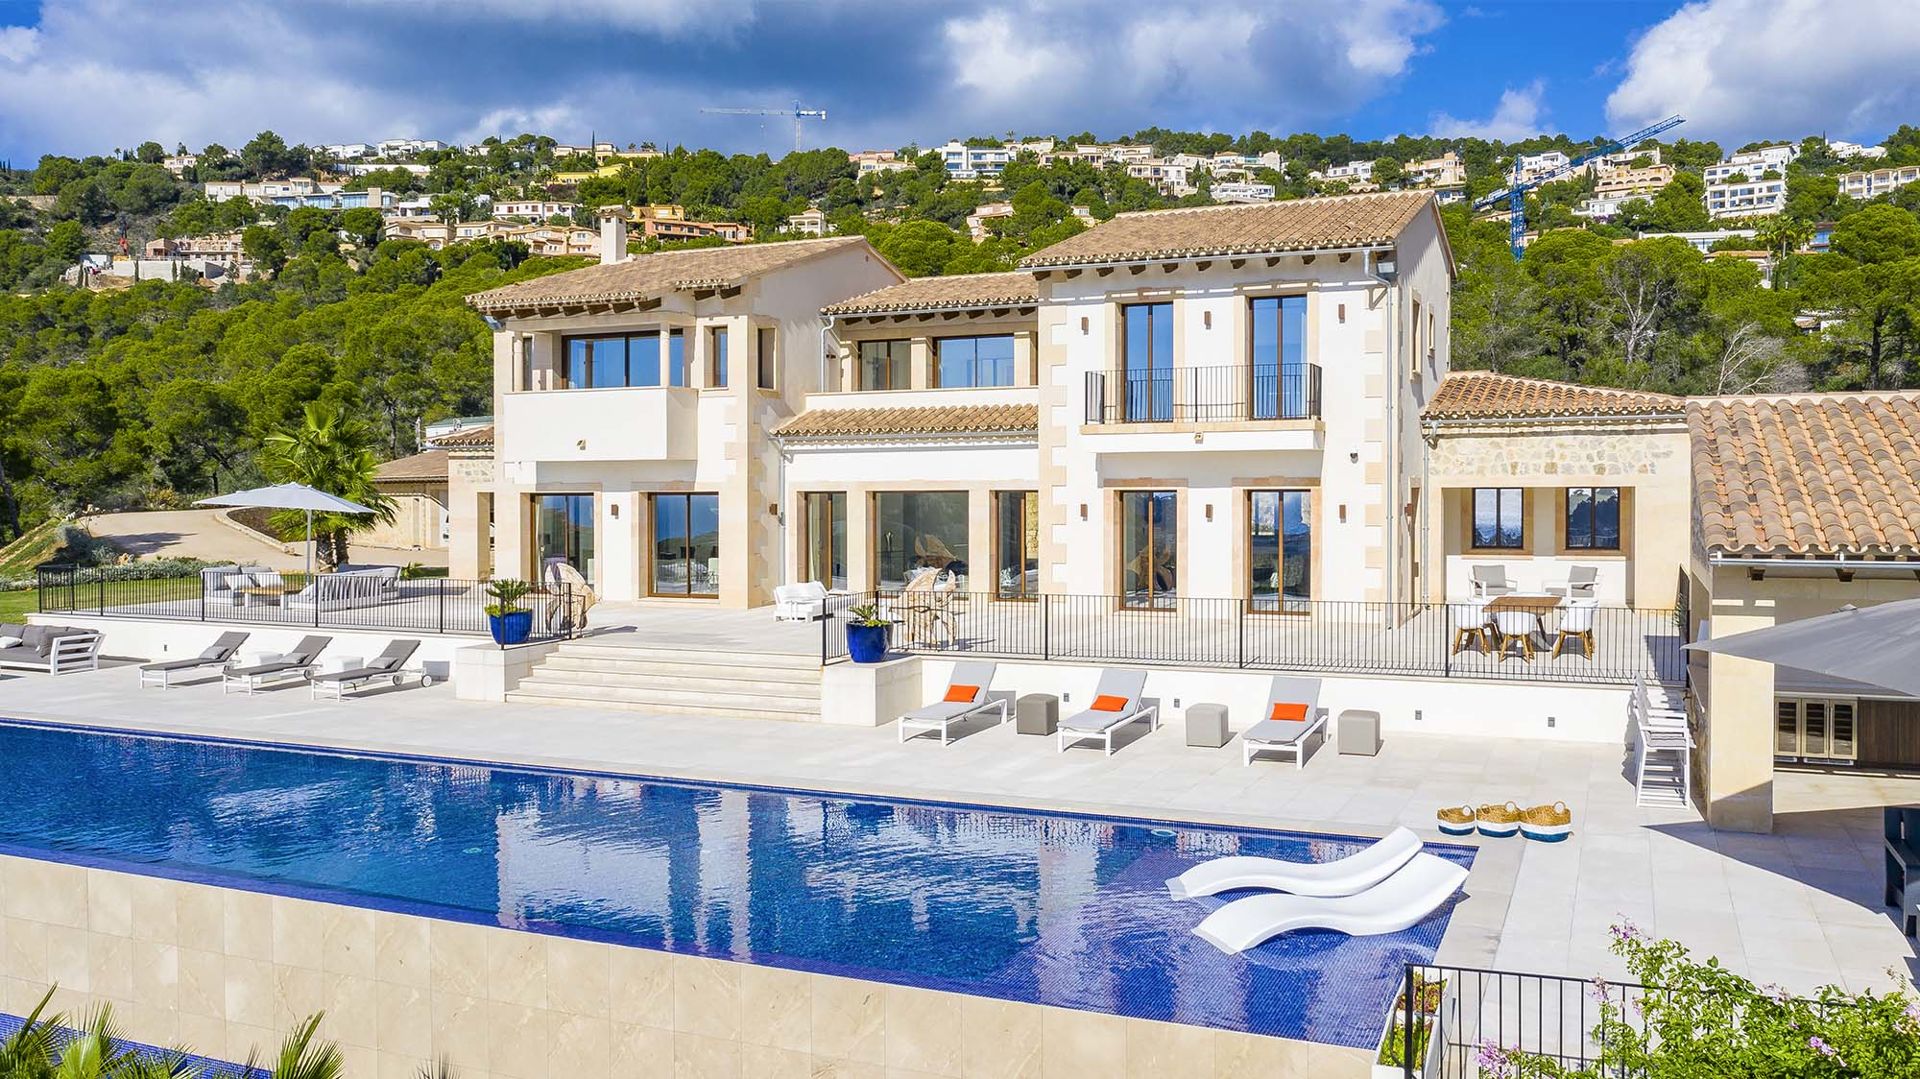 Unique luxurious property in prime location with sea view - Rear view from the Mediterranean property